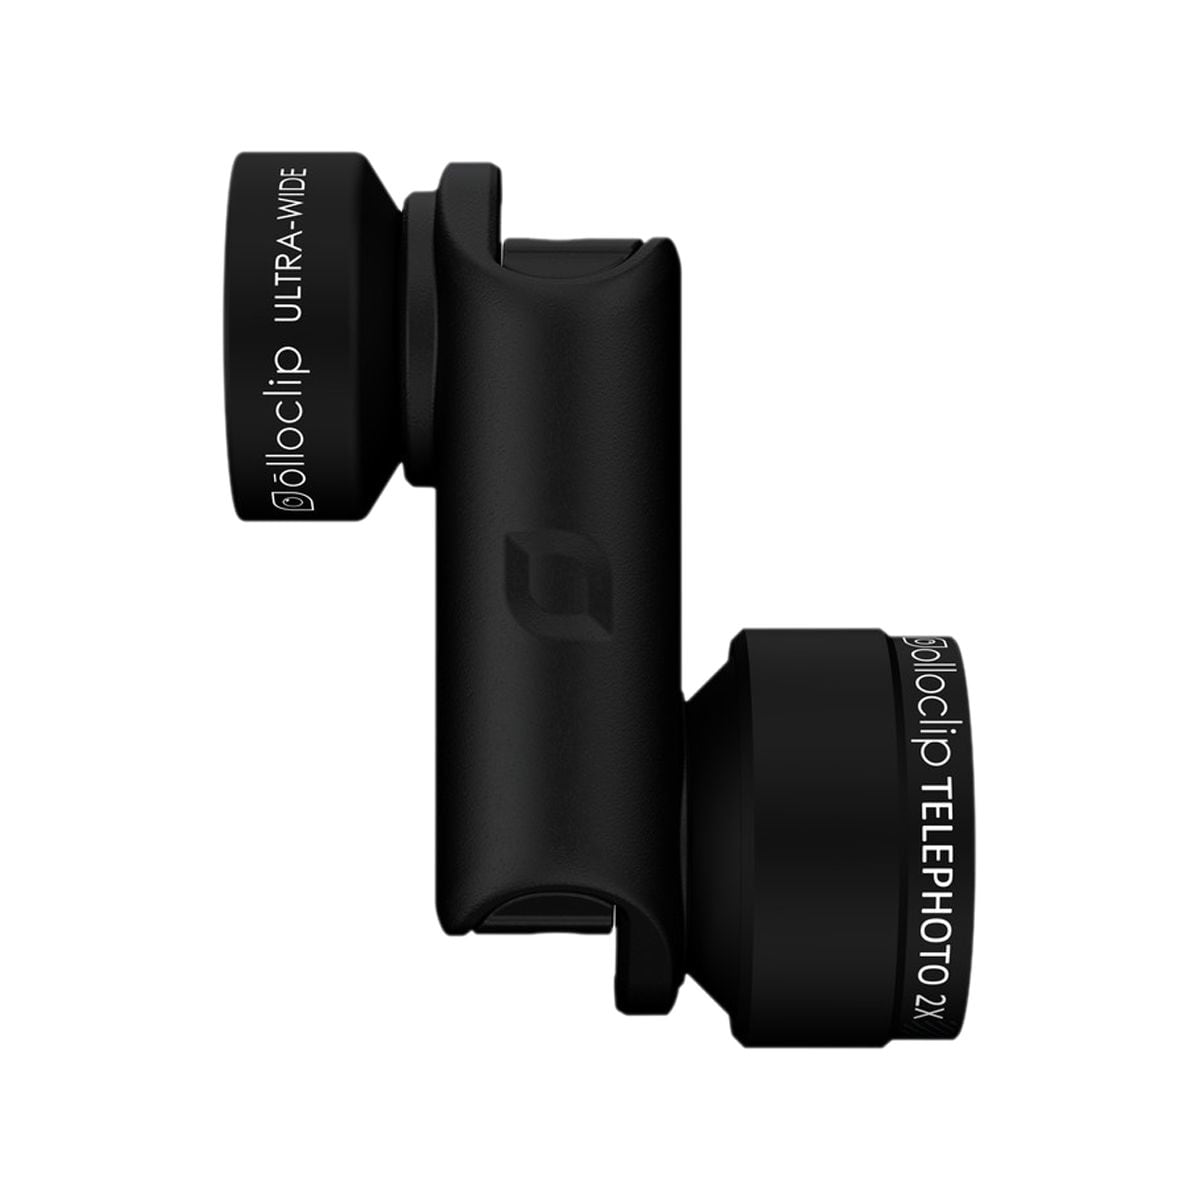 olloclip Telephoto\/Ultra-Wide Lens - iPhone 6\/6 Plus Black, One Size